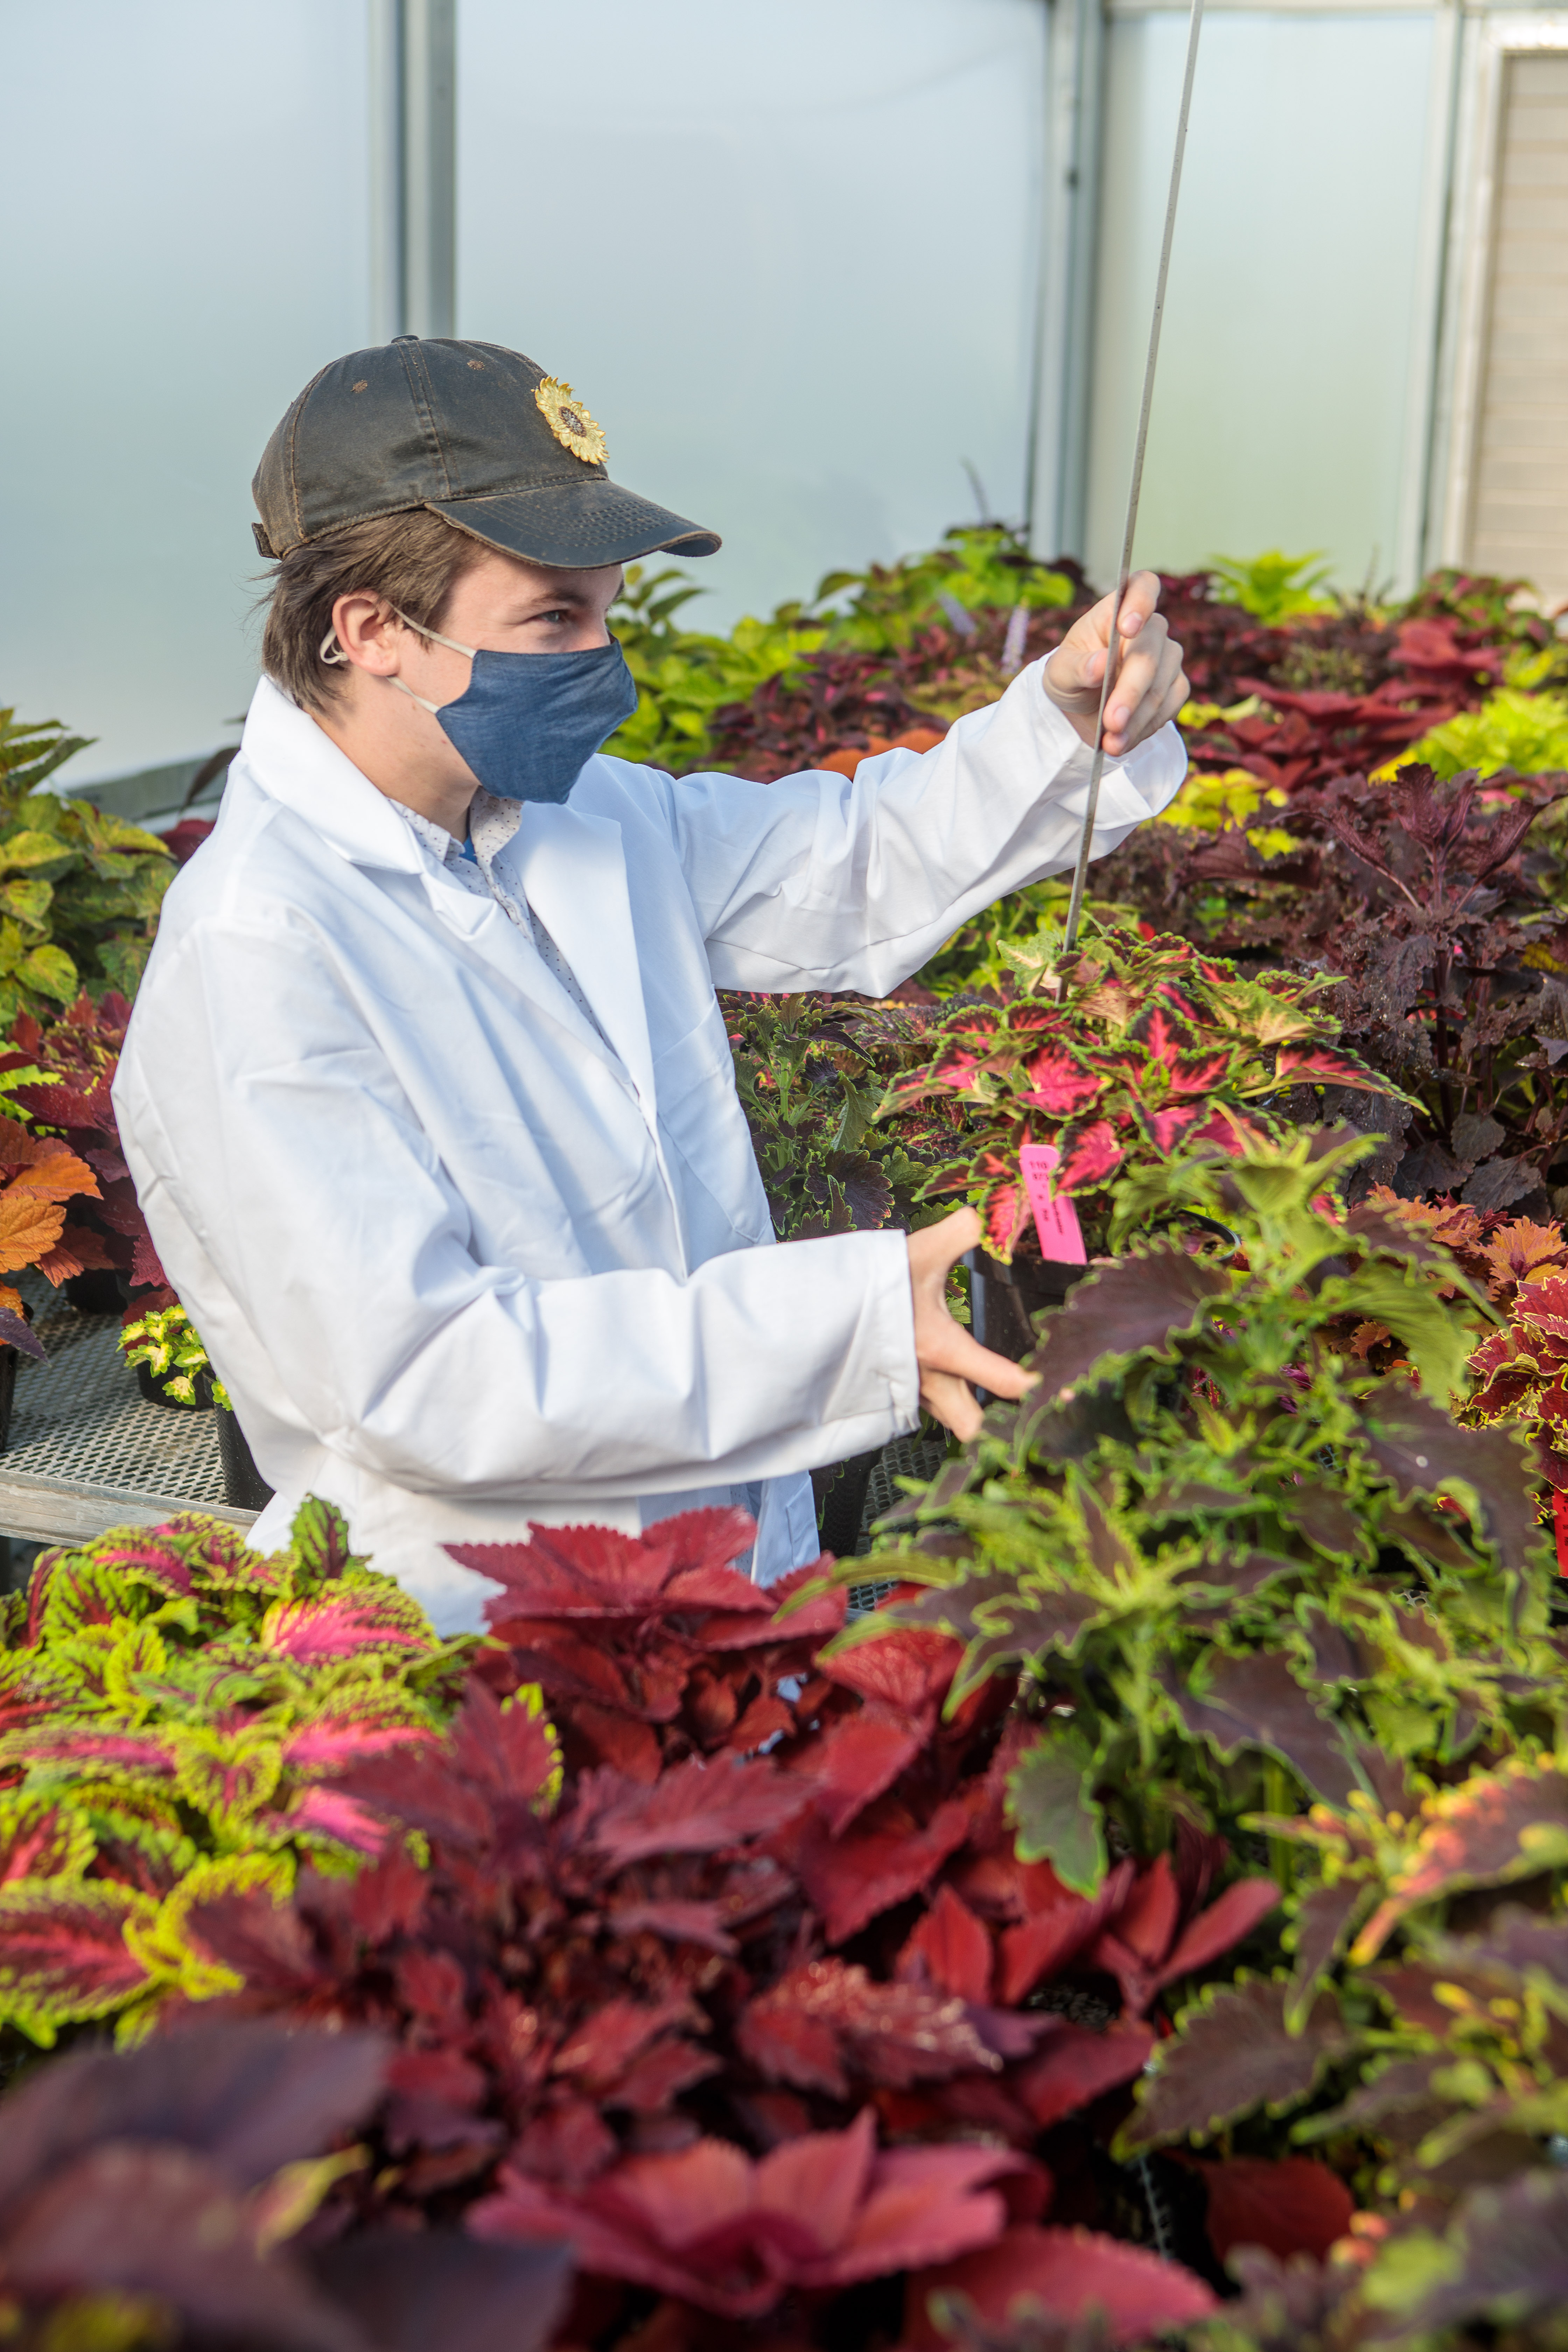 (l-r) Ty Rich, Paul Cockson and Garrett Owen compare notes for a coleus cultivar trial at the UK Horticultural Research Farm. Photo by Matt Barton